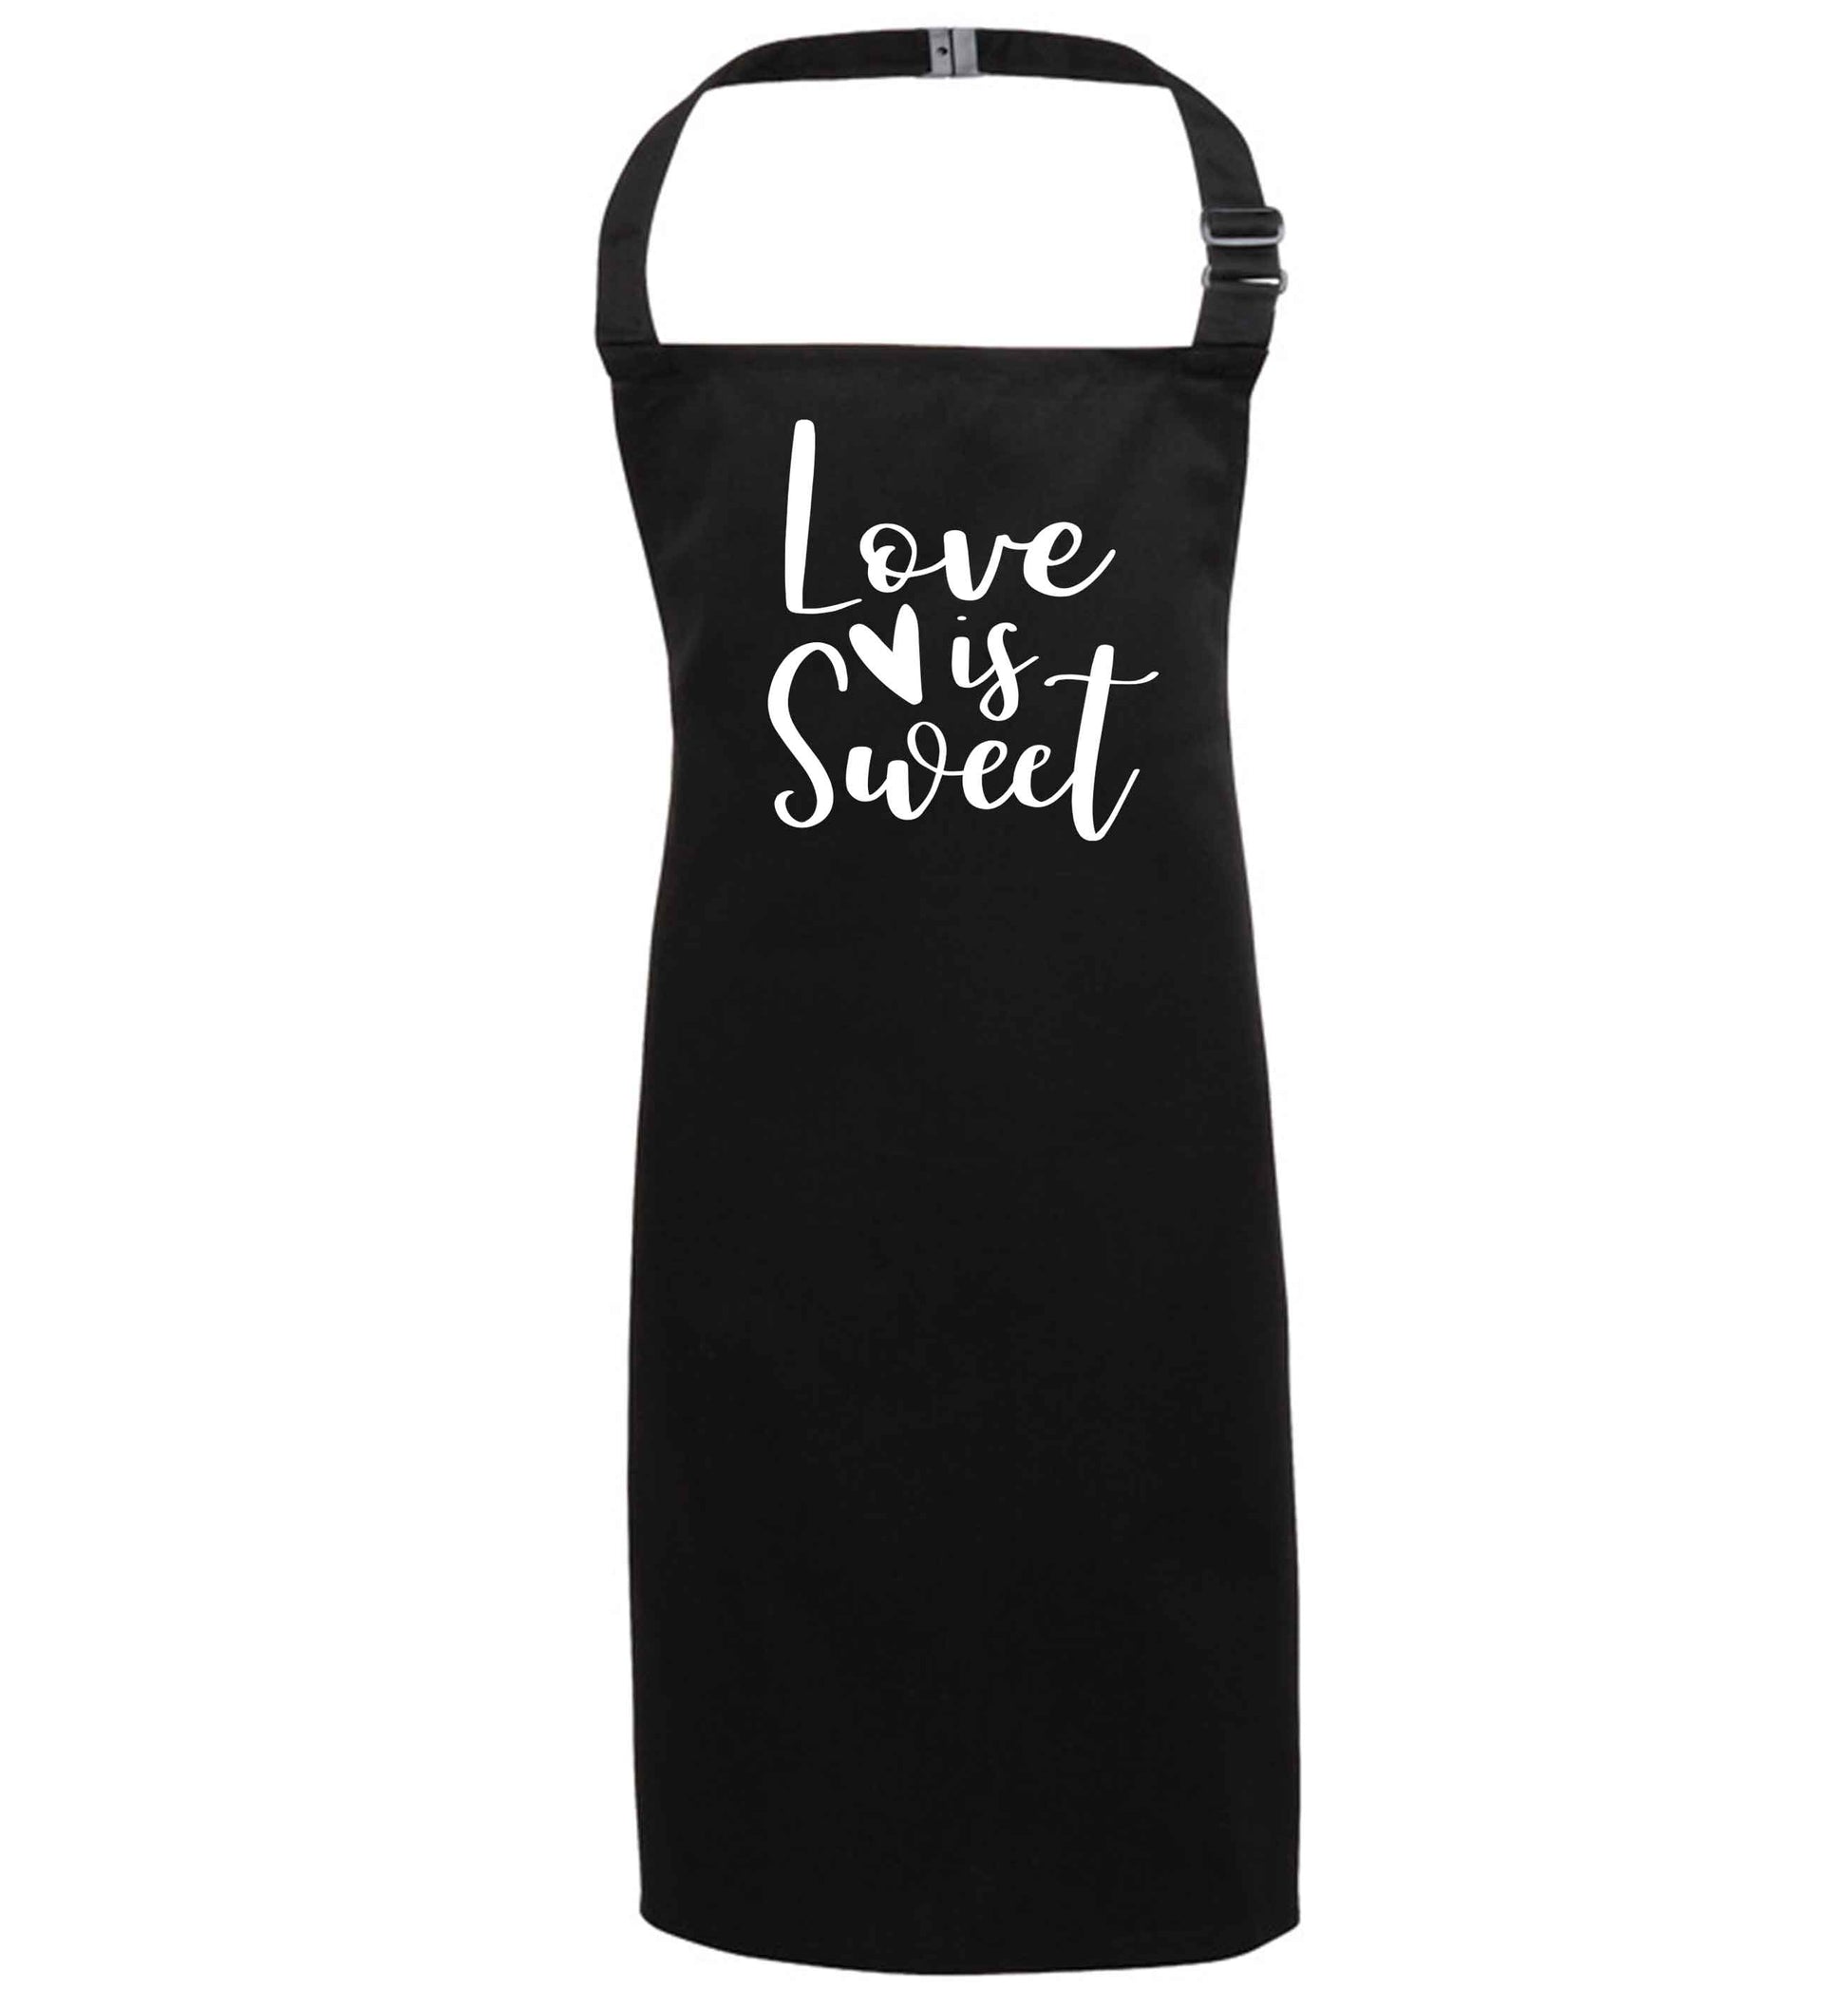 Love really does make the world go round! Ideal for weddings, valentines or just simply to show someone you love them!  black apron 7-10 years